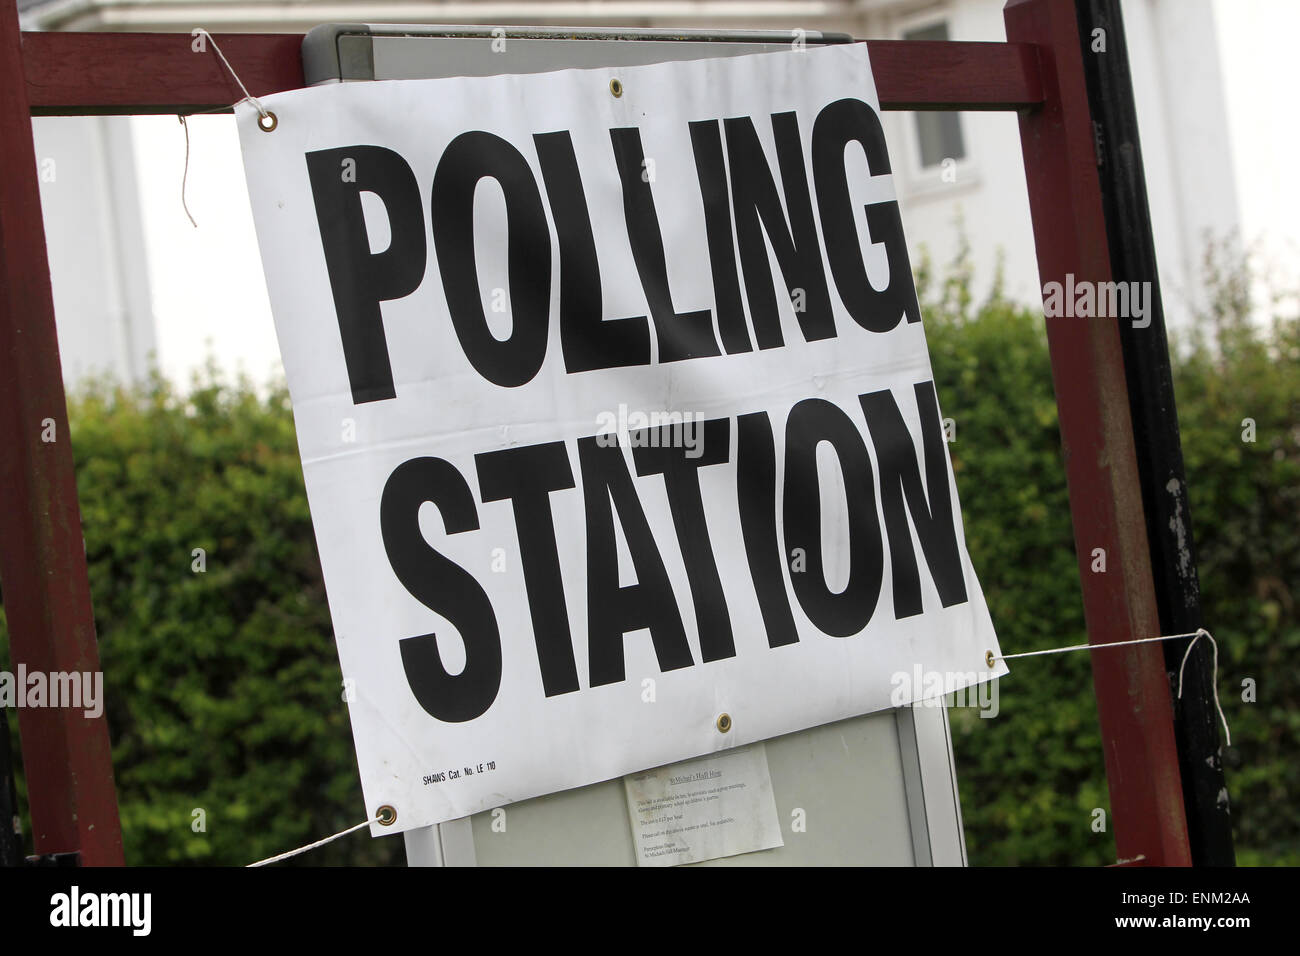 Polling Station sign outside St Michaels Church Hall in Chichester, West Sussex, UK. Stock Photo